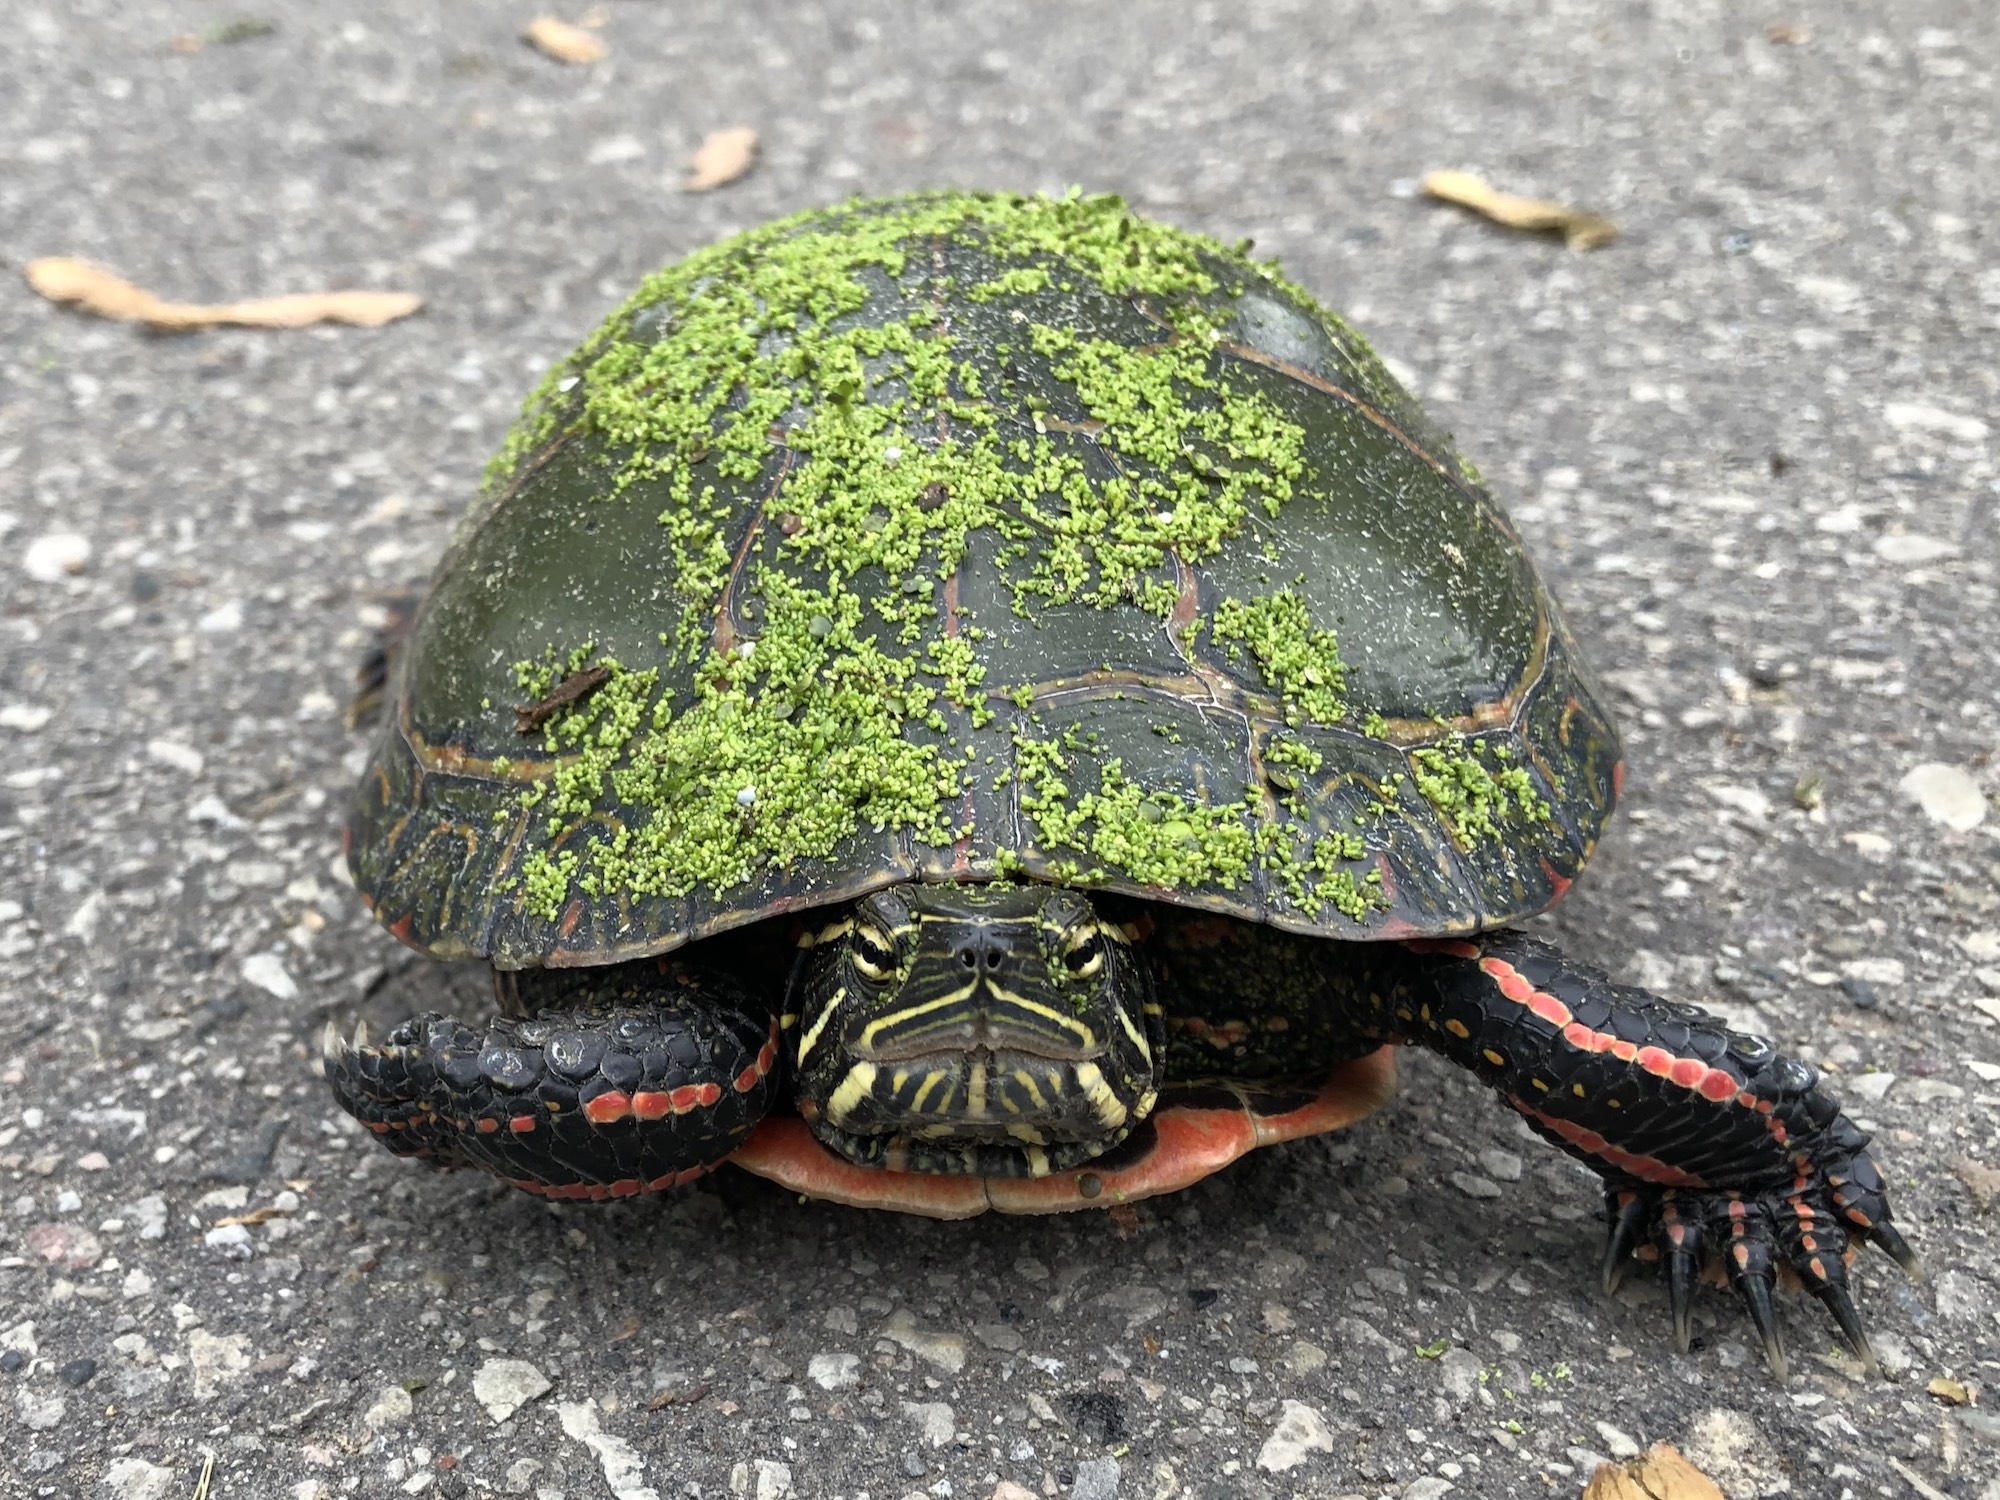 Painted Turtle on Woodrow Drive in Madison, Wisconsin on May 22, 2021.